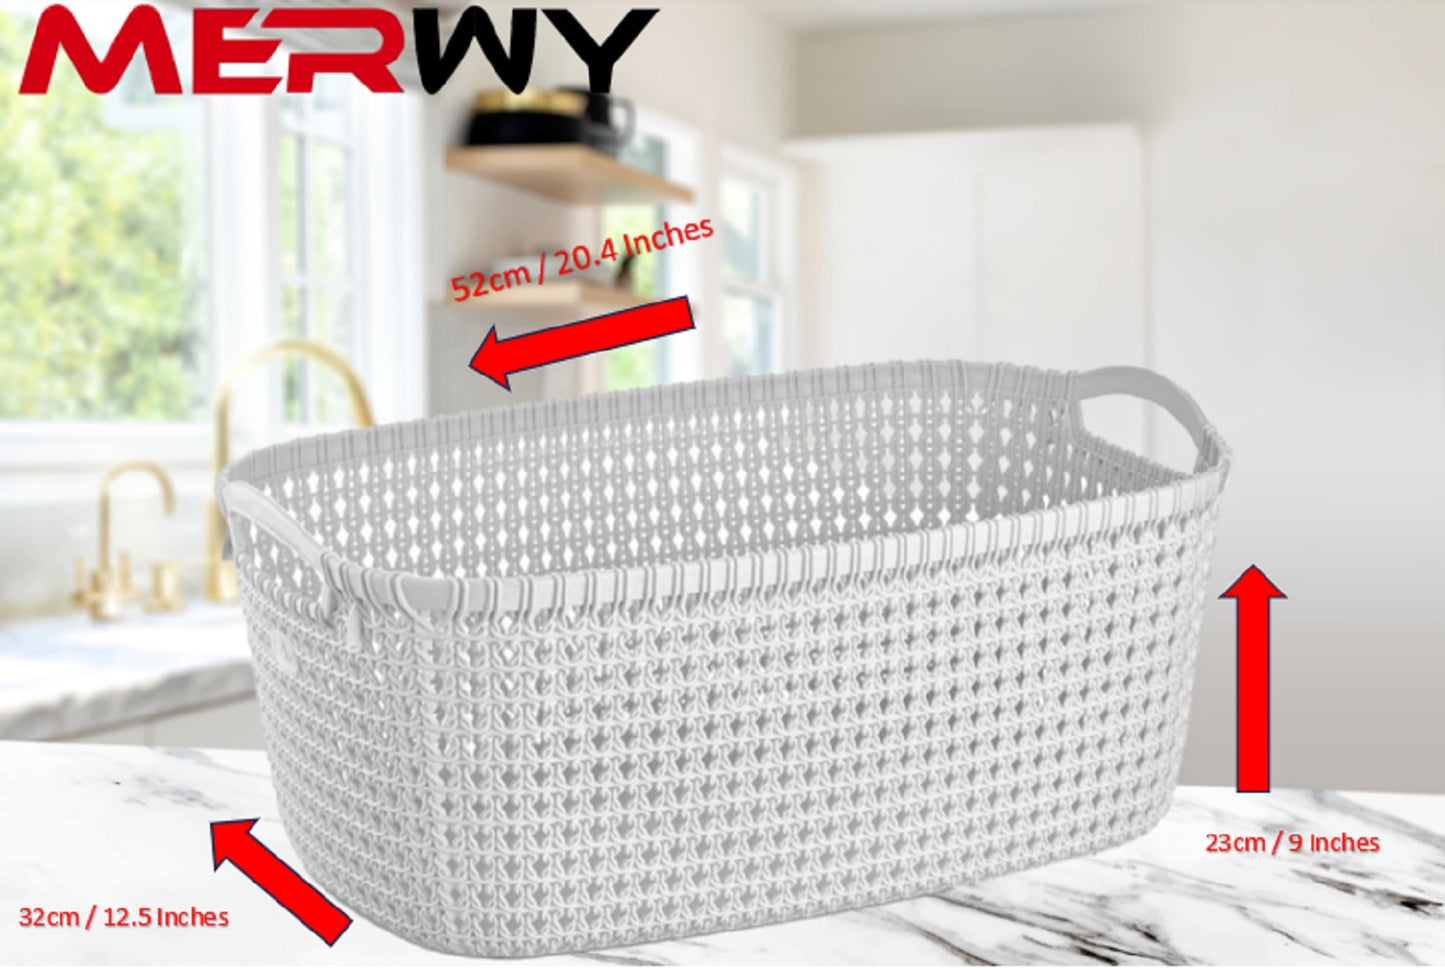 30 Litre Washing Laundry Basket with Handles Rattan Style